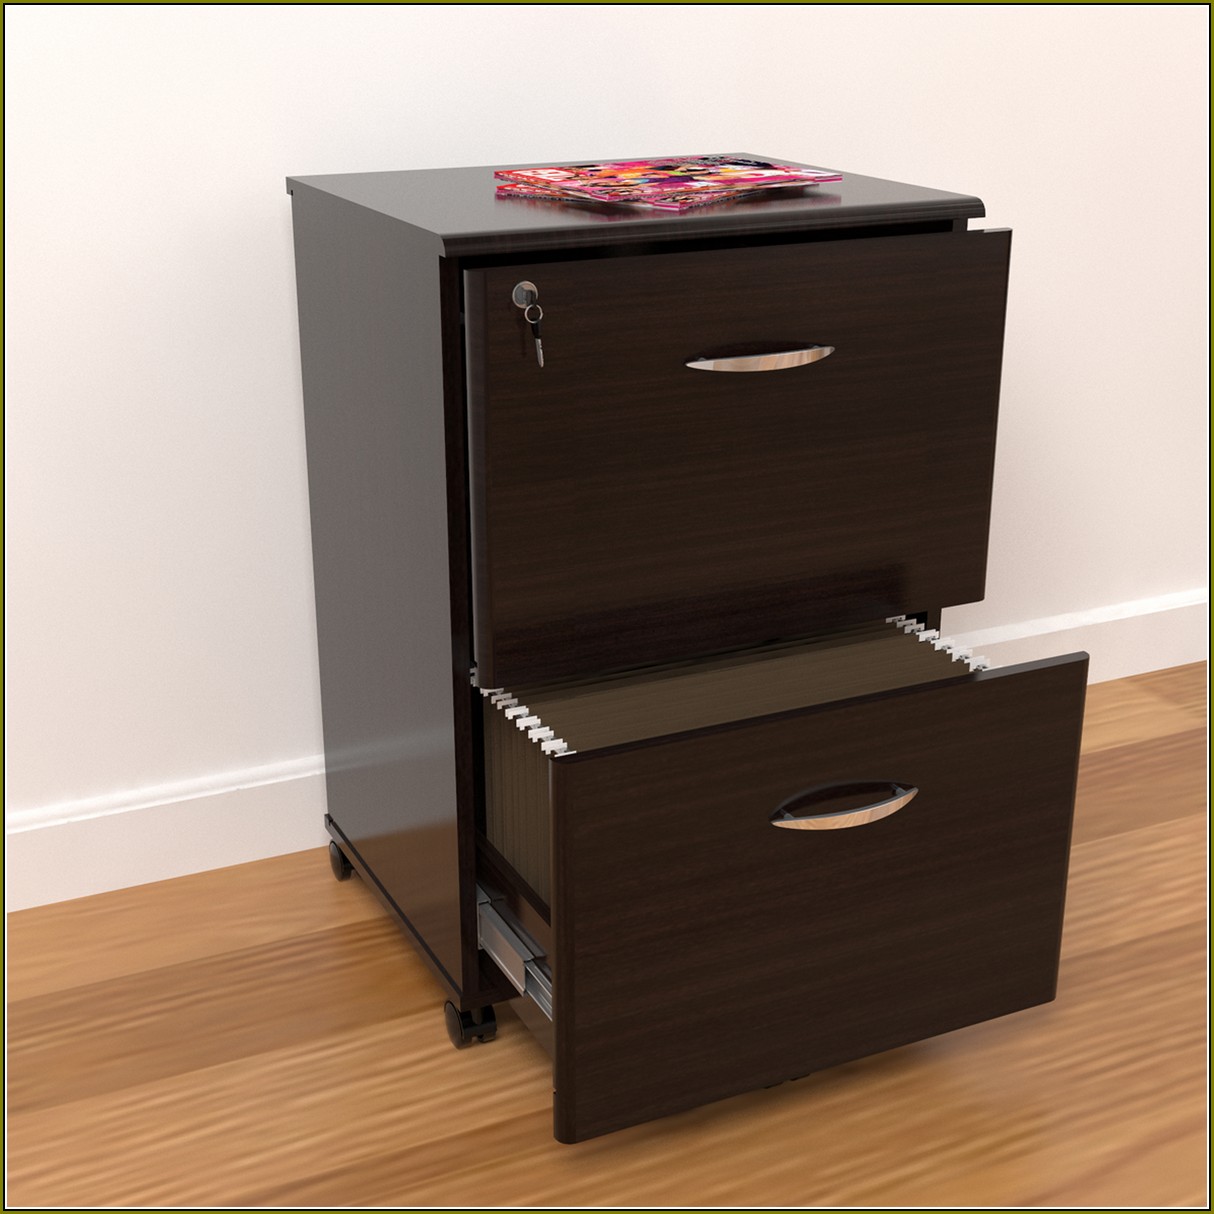 2 Drawer Metal File Cabinet With Lock